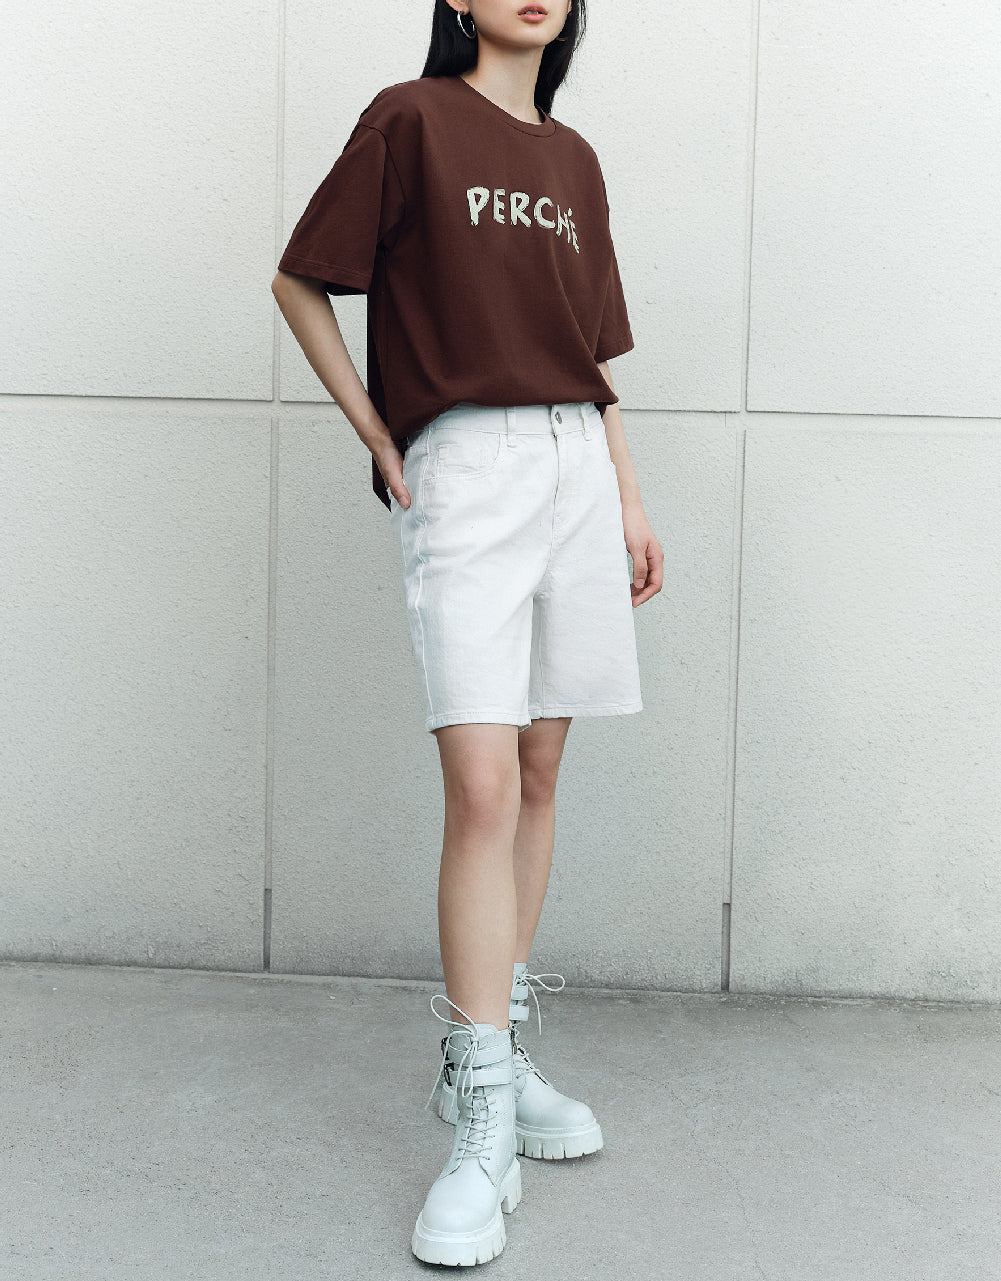 Letter Printed Crew Neck T-Shirt